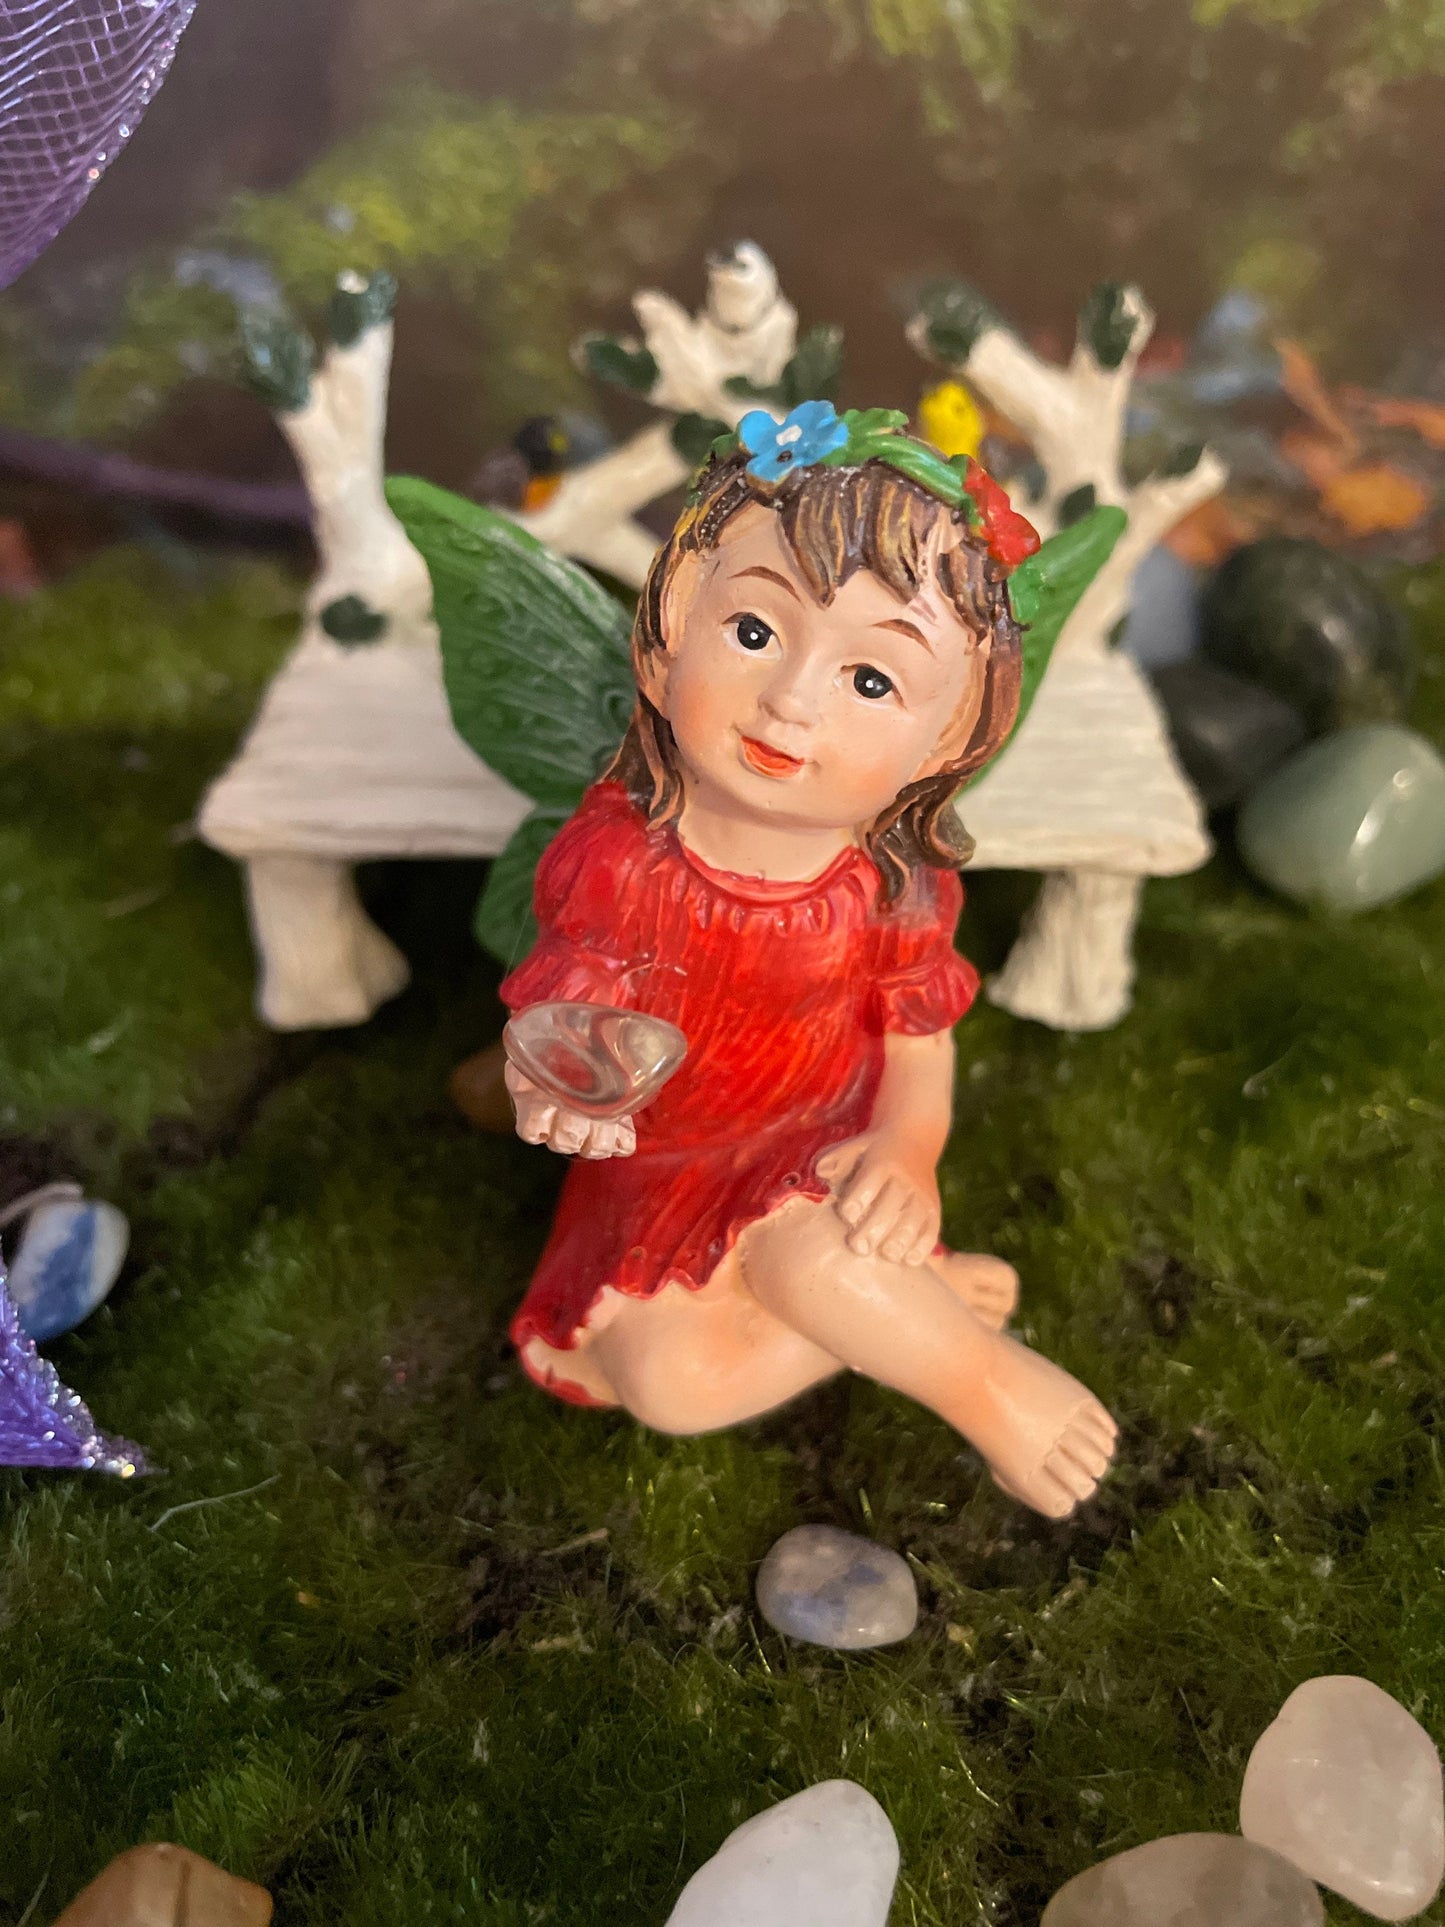 Look at her sweet face and she’s holding a clear quartz crystal hand-painted fairy with crystals